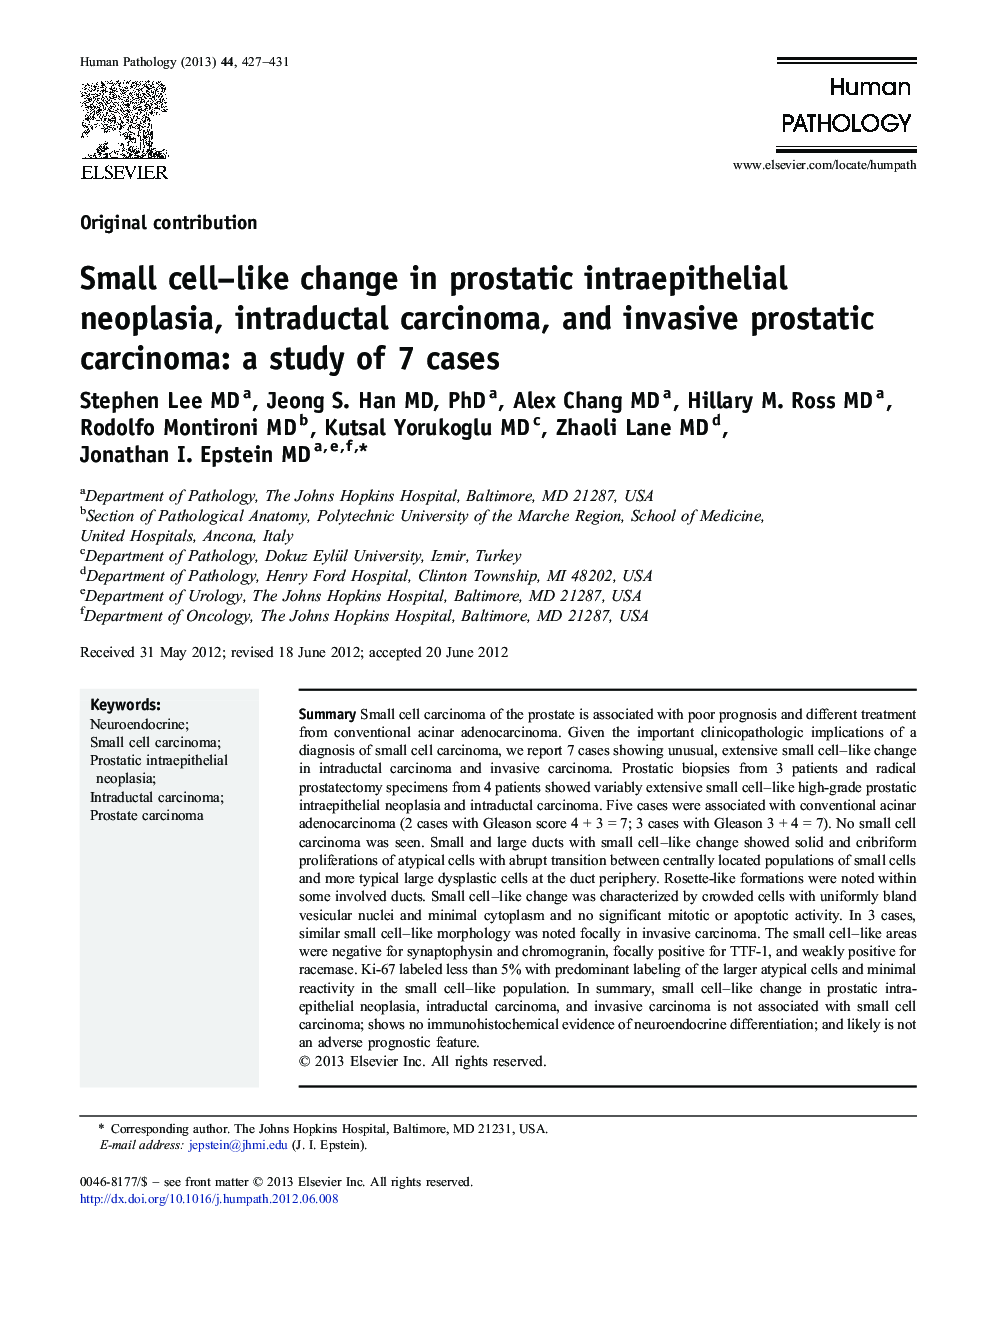 Small cell–like change in prostatic intraepithelial neoplasia, intraductal carcinoma, and invasive prostatic carcinoma: a study of 7 cases